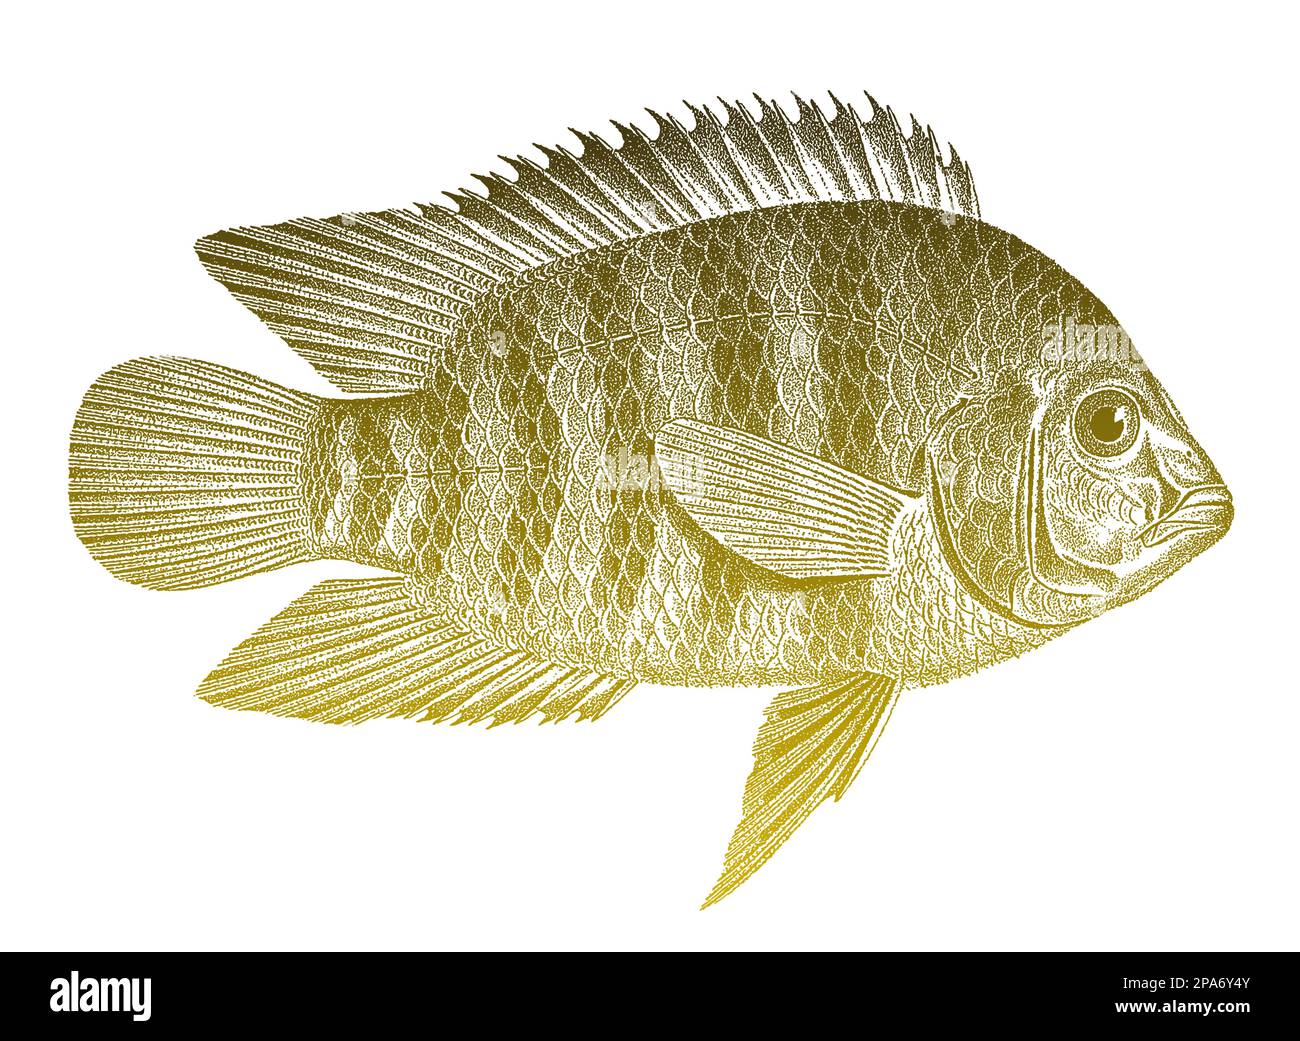 Chameleon cichlid australoheros facetus, freshwater fish from South America Stock Vector